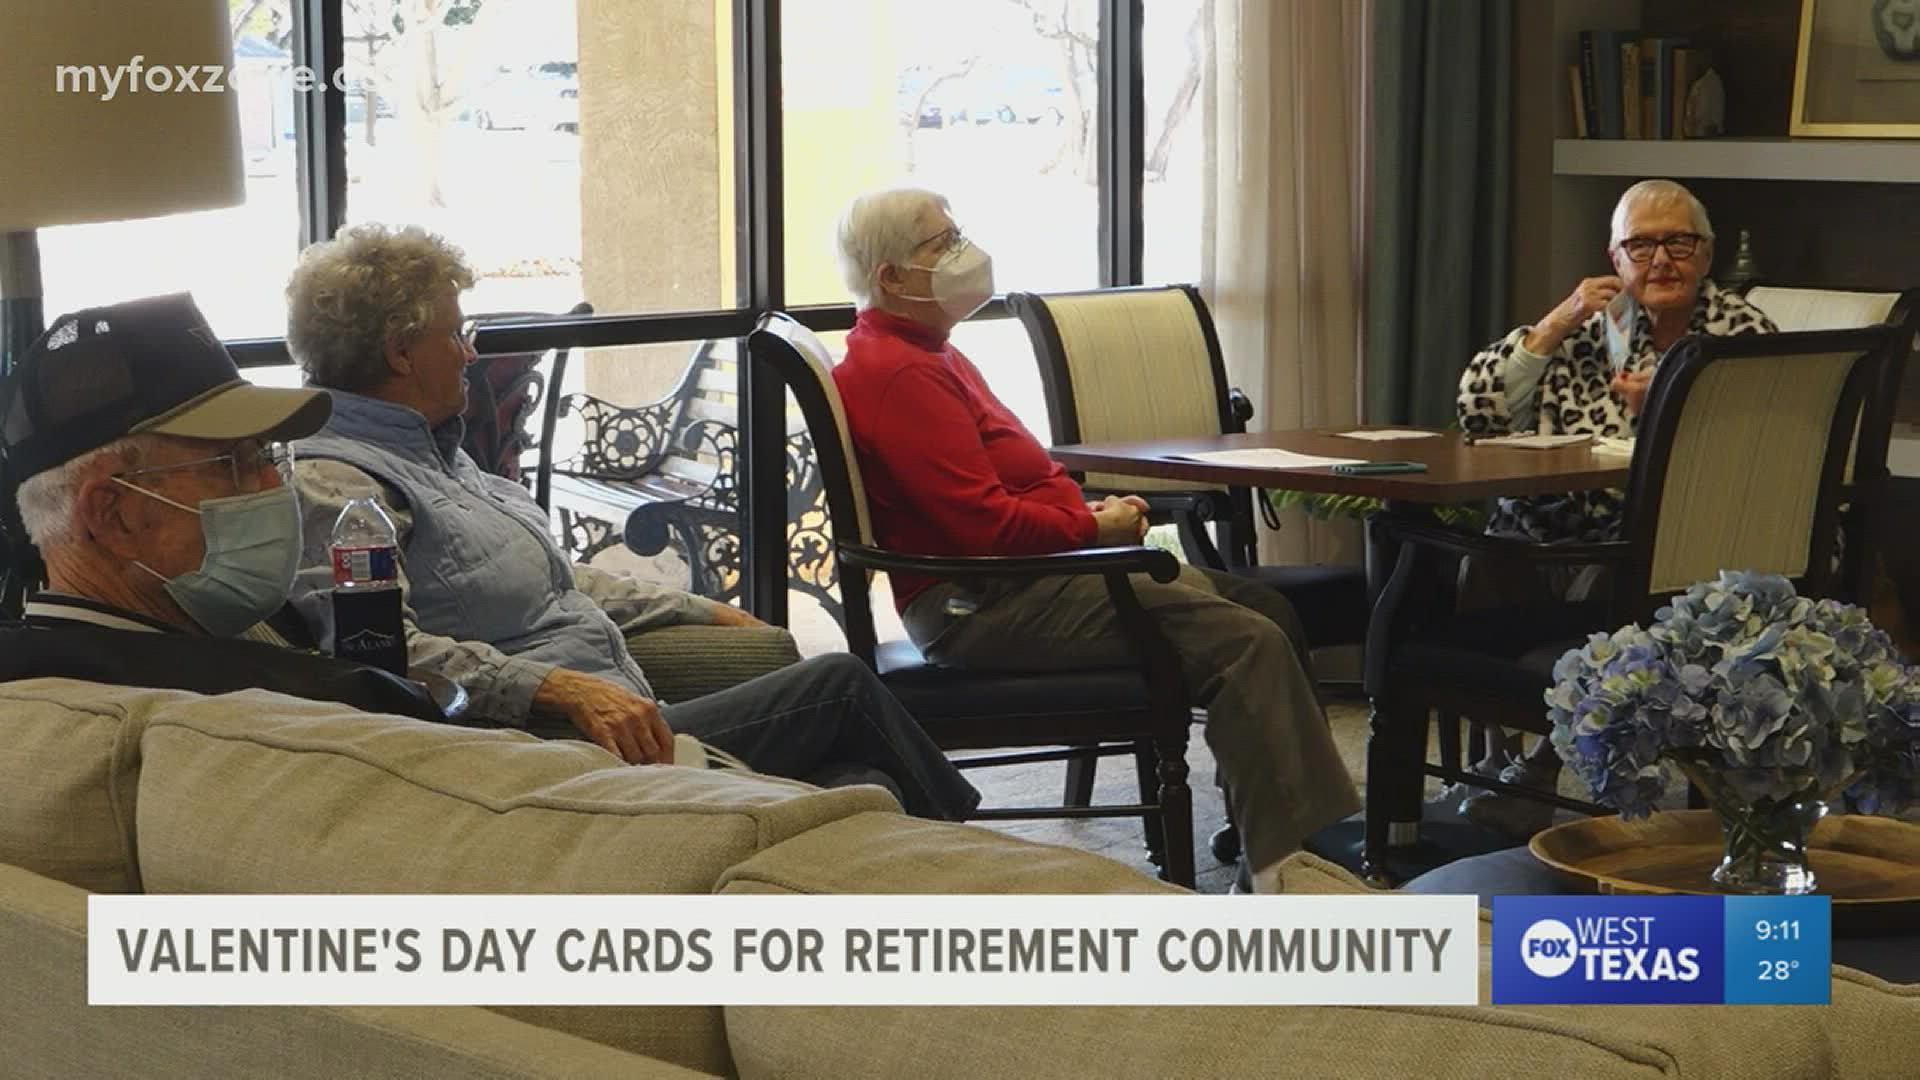 A West Texas retirement community is asking for the public's help in showing its residents some love by sending them Valentine's Day cards.